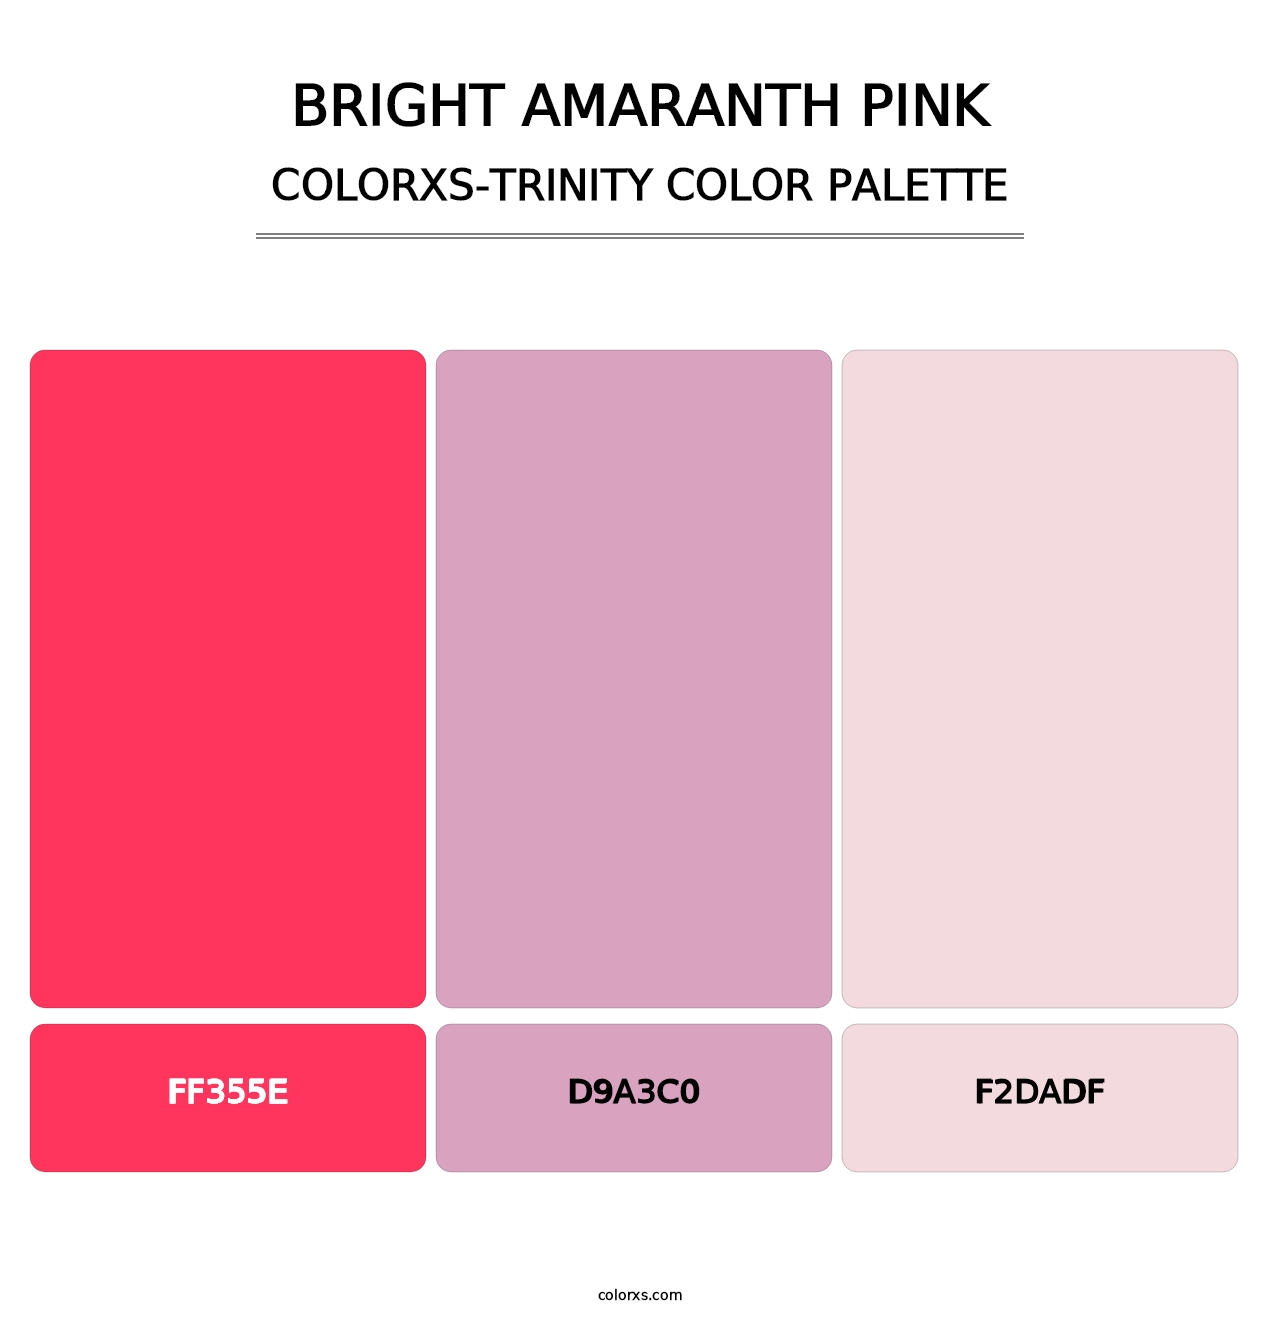 Bright Amaranth Pink - Colorxs Trinity Palette